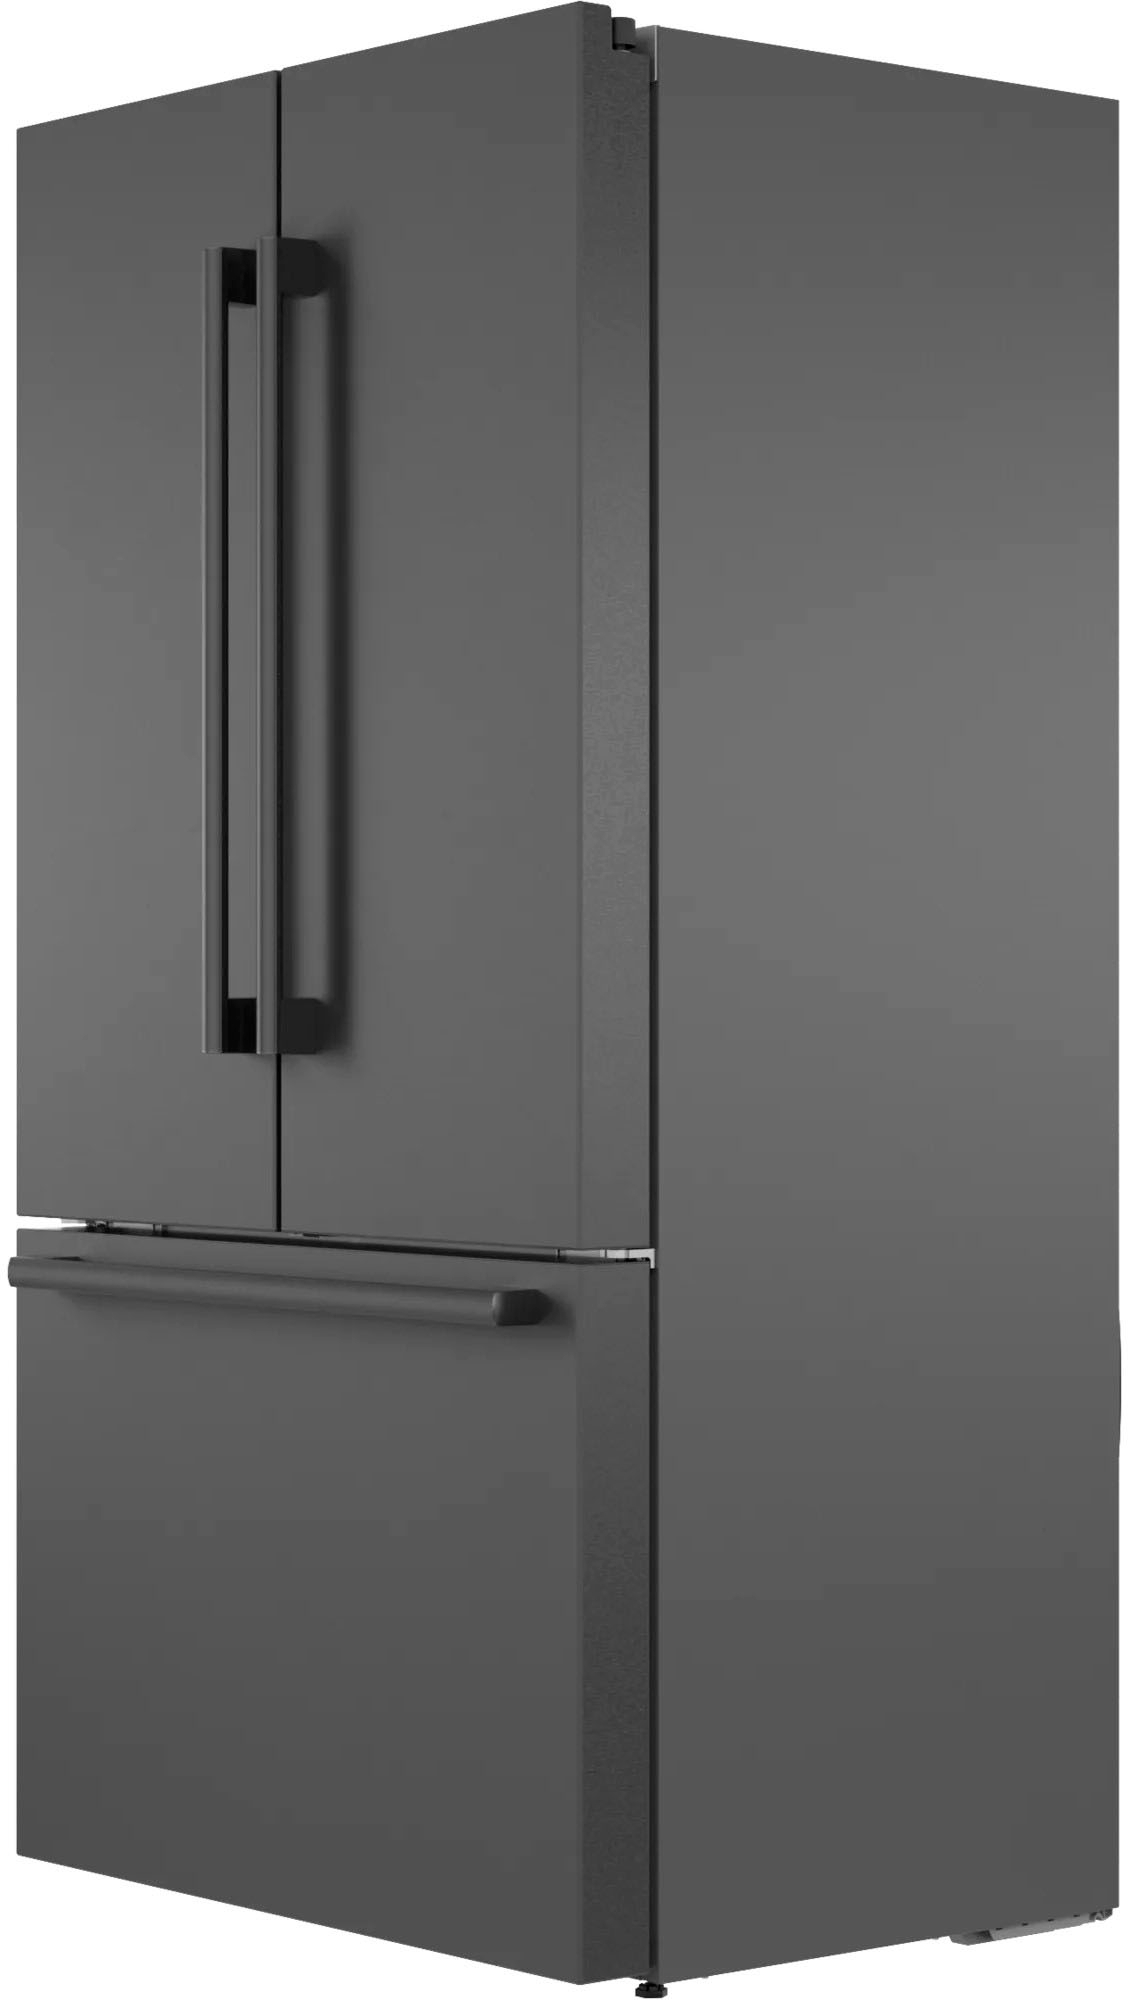 Left View: Bosch - 300 Series 24" Front Control Built-In Dishwasher with Stainless Steel Tub - Stainless Steel